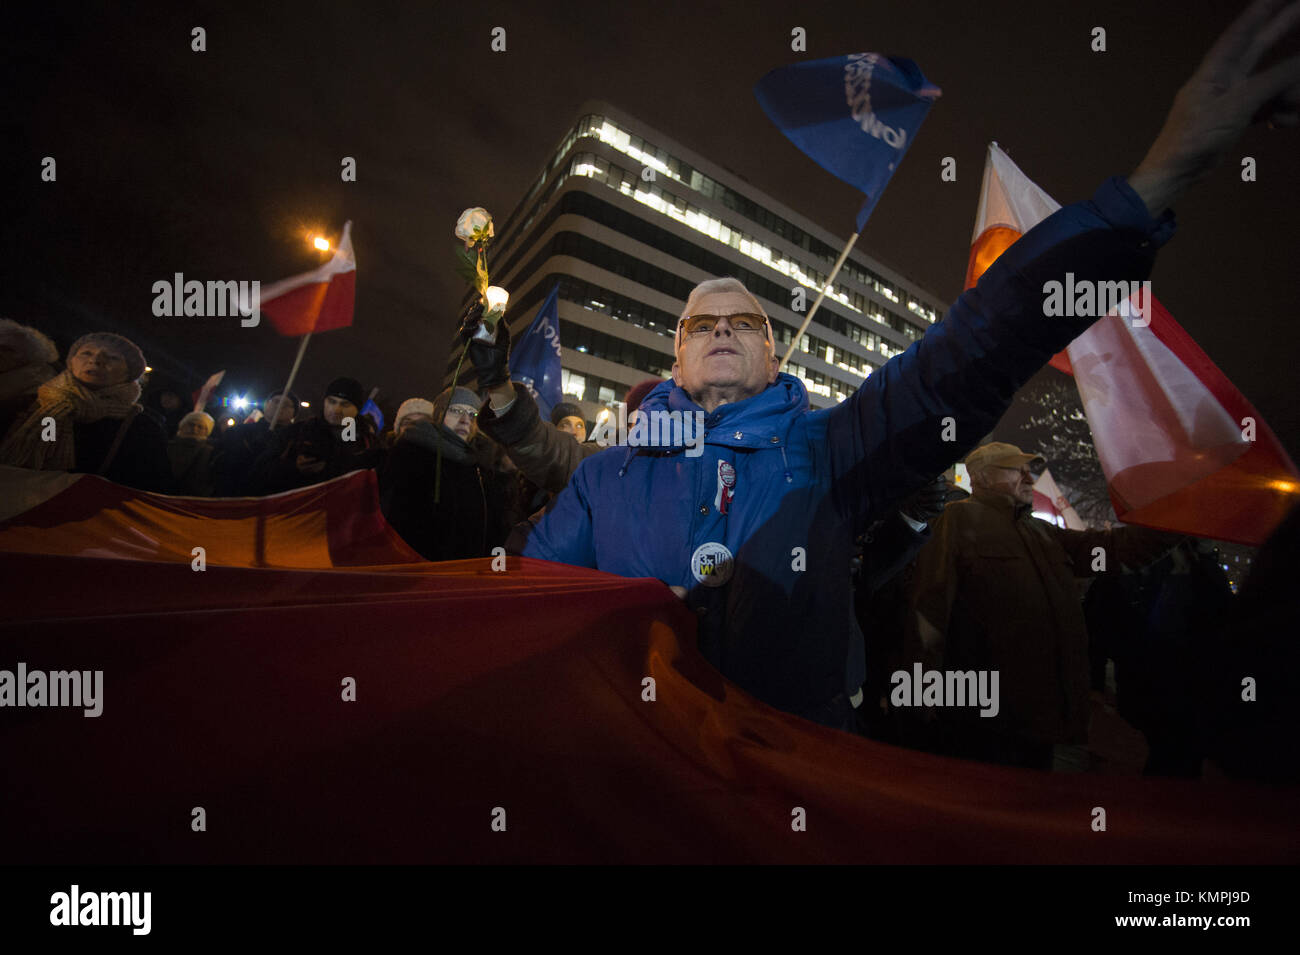 Krakow, Poland. 8th Dec, 2017. People gather in front of Krakow Court while holding a large banner to protest against the new judicial reforms. Today, The Polish parliament approved the government proposals to hand the ruling Law and Justice party (PiS) total control of judicial appointments and the supreme court. Credit: Omar Marques/SOPA/ZUMA Wire/Alamy Live News Stock Photo